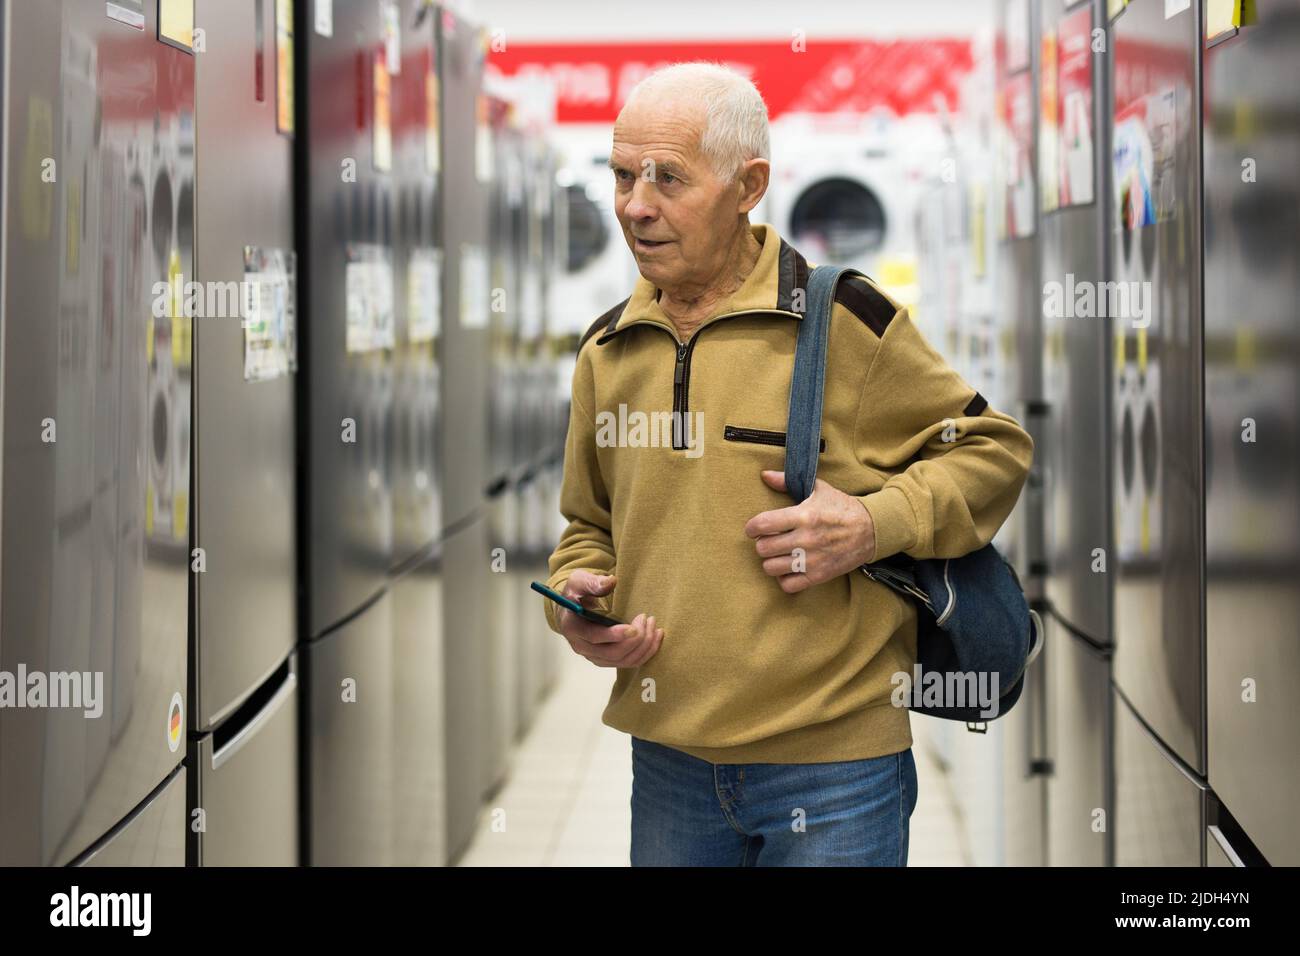 senor man pensioner buying fridge in showroom of electrical appliance store Stock Photo